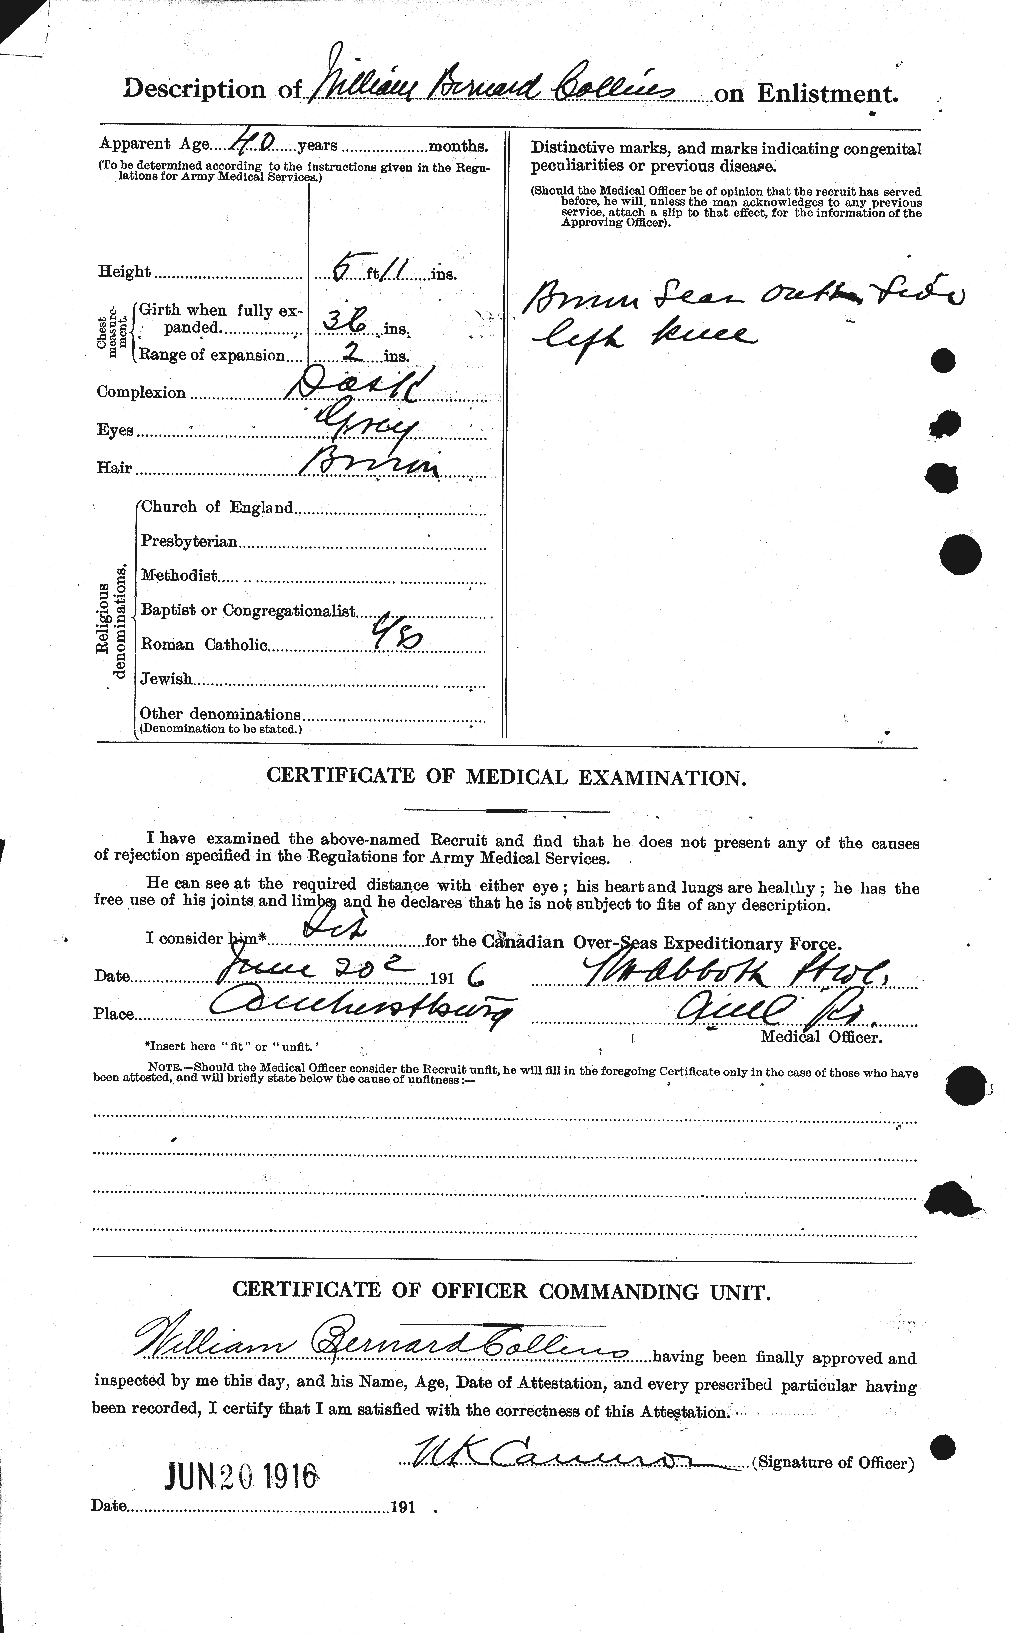 Personnel Records of the First World War - CEF 068806b